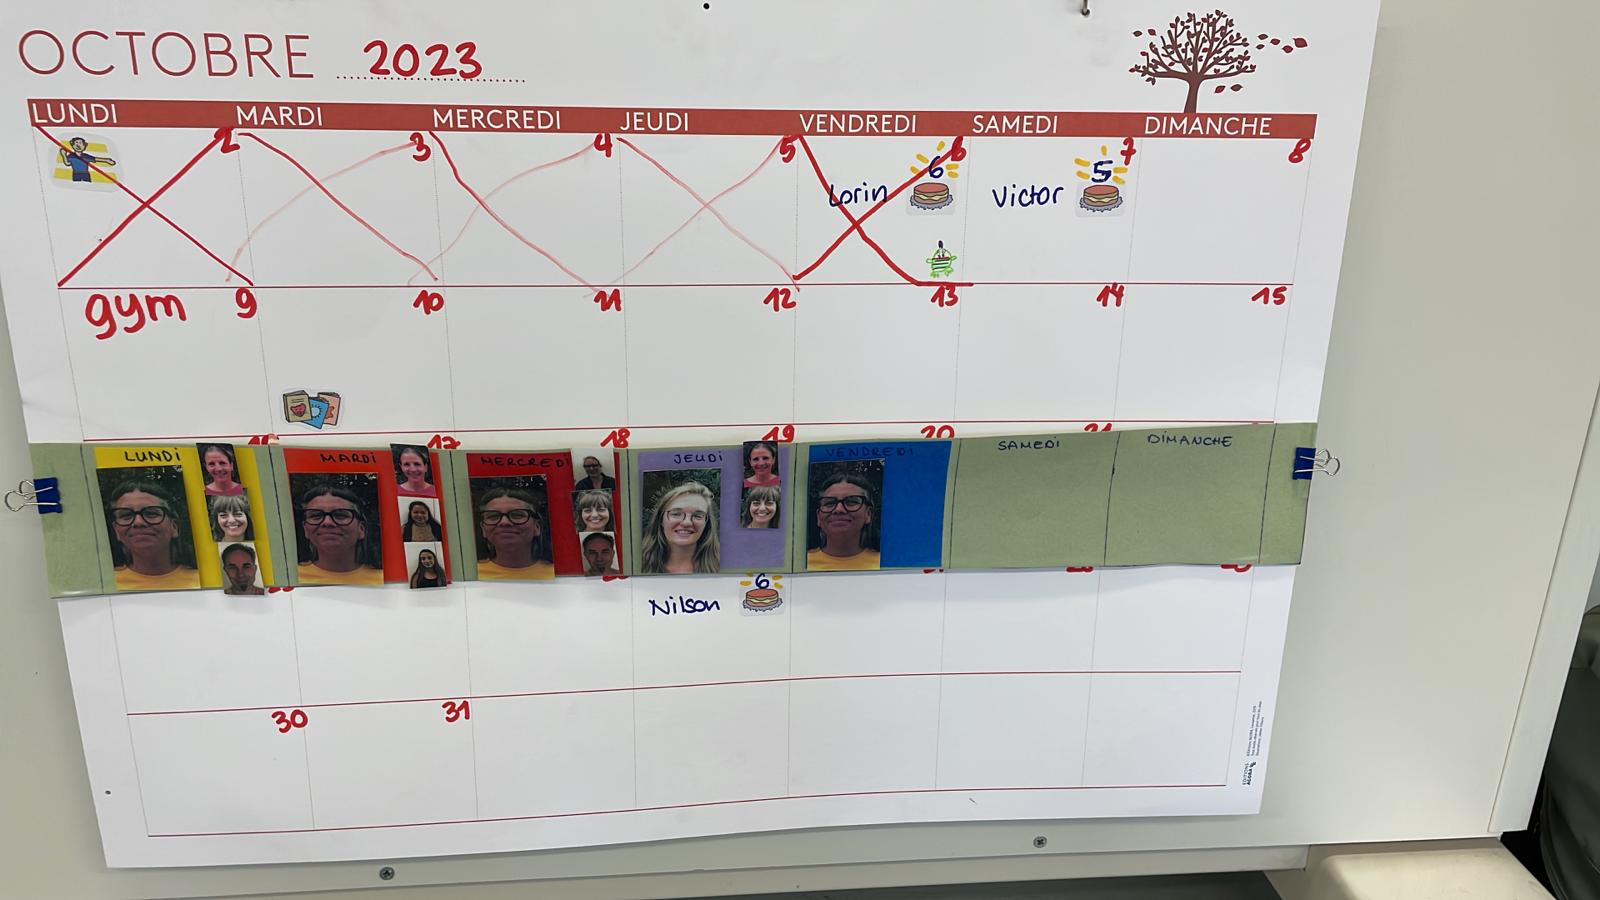 top image is hanging cloth calendar banner with moveable velcro labels to indicate day, month and year. bottom image is paper wall calendar showing the month of October with some dates crossed out and phots of staff members as labels